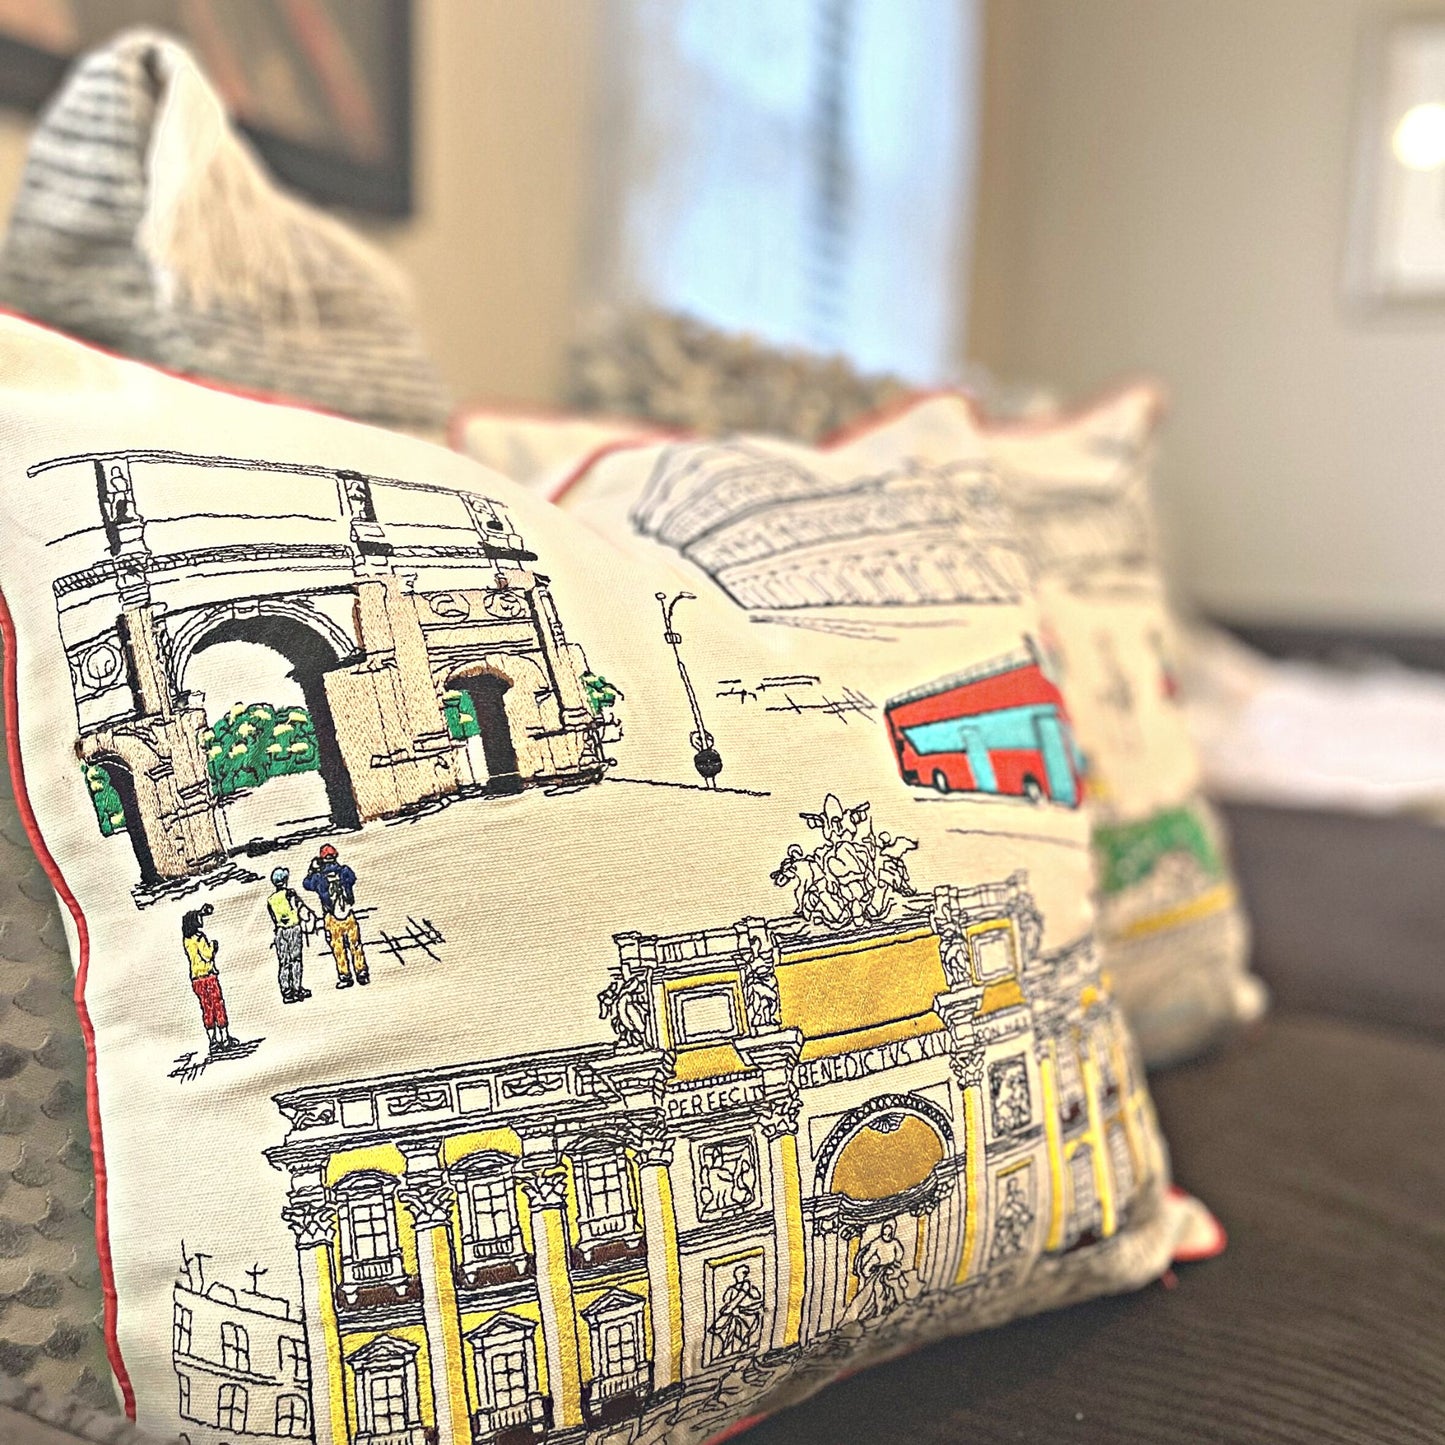 Embroidered City Artistry Collection Rome Pillow Set